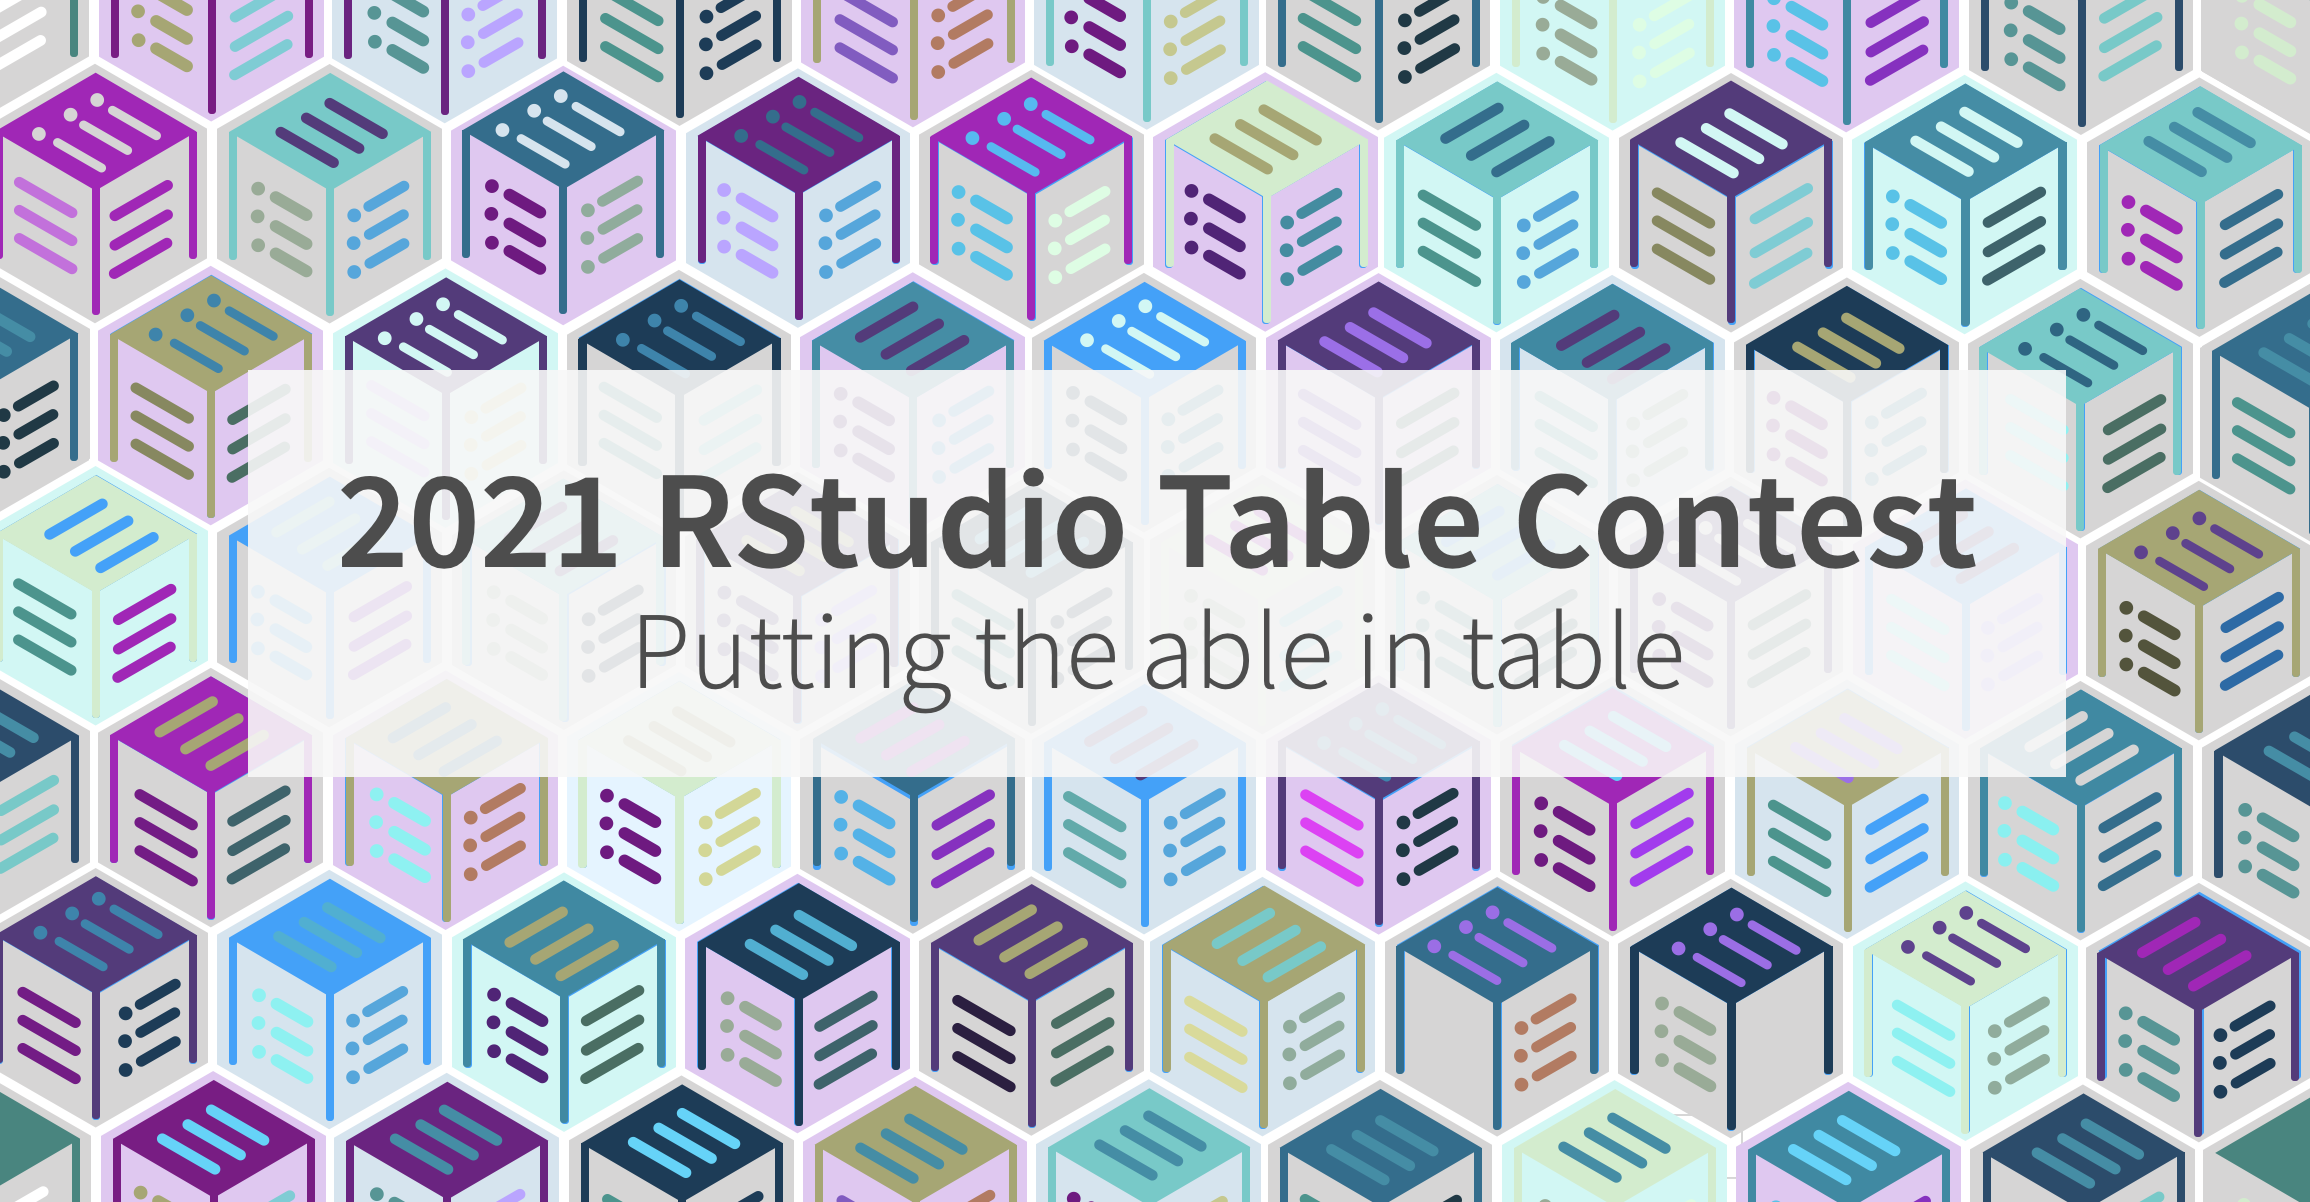 Text: 2021 RStudio Table Contest. Putting the able in table. The background is made up of illustration of tables.